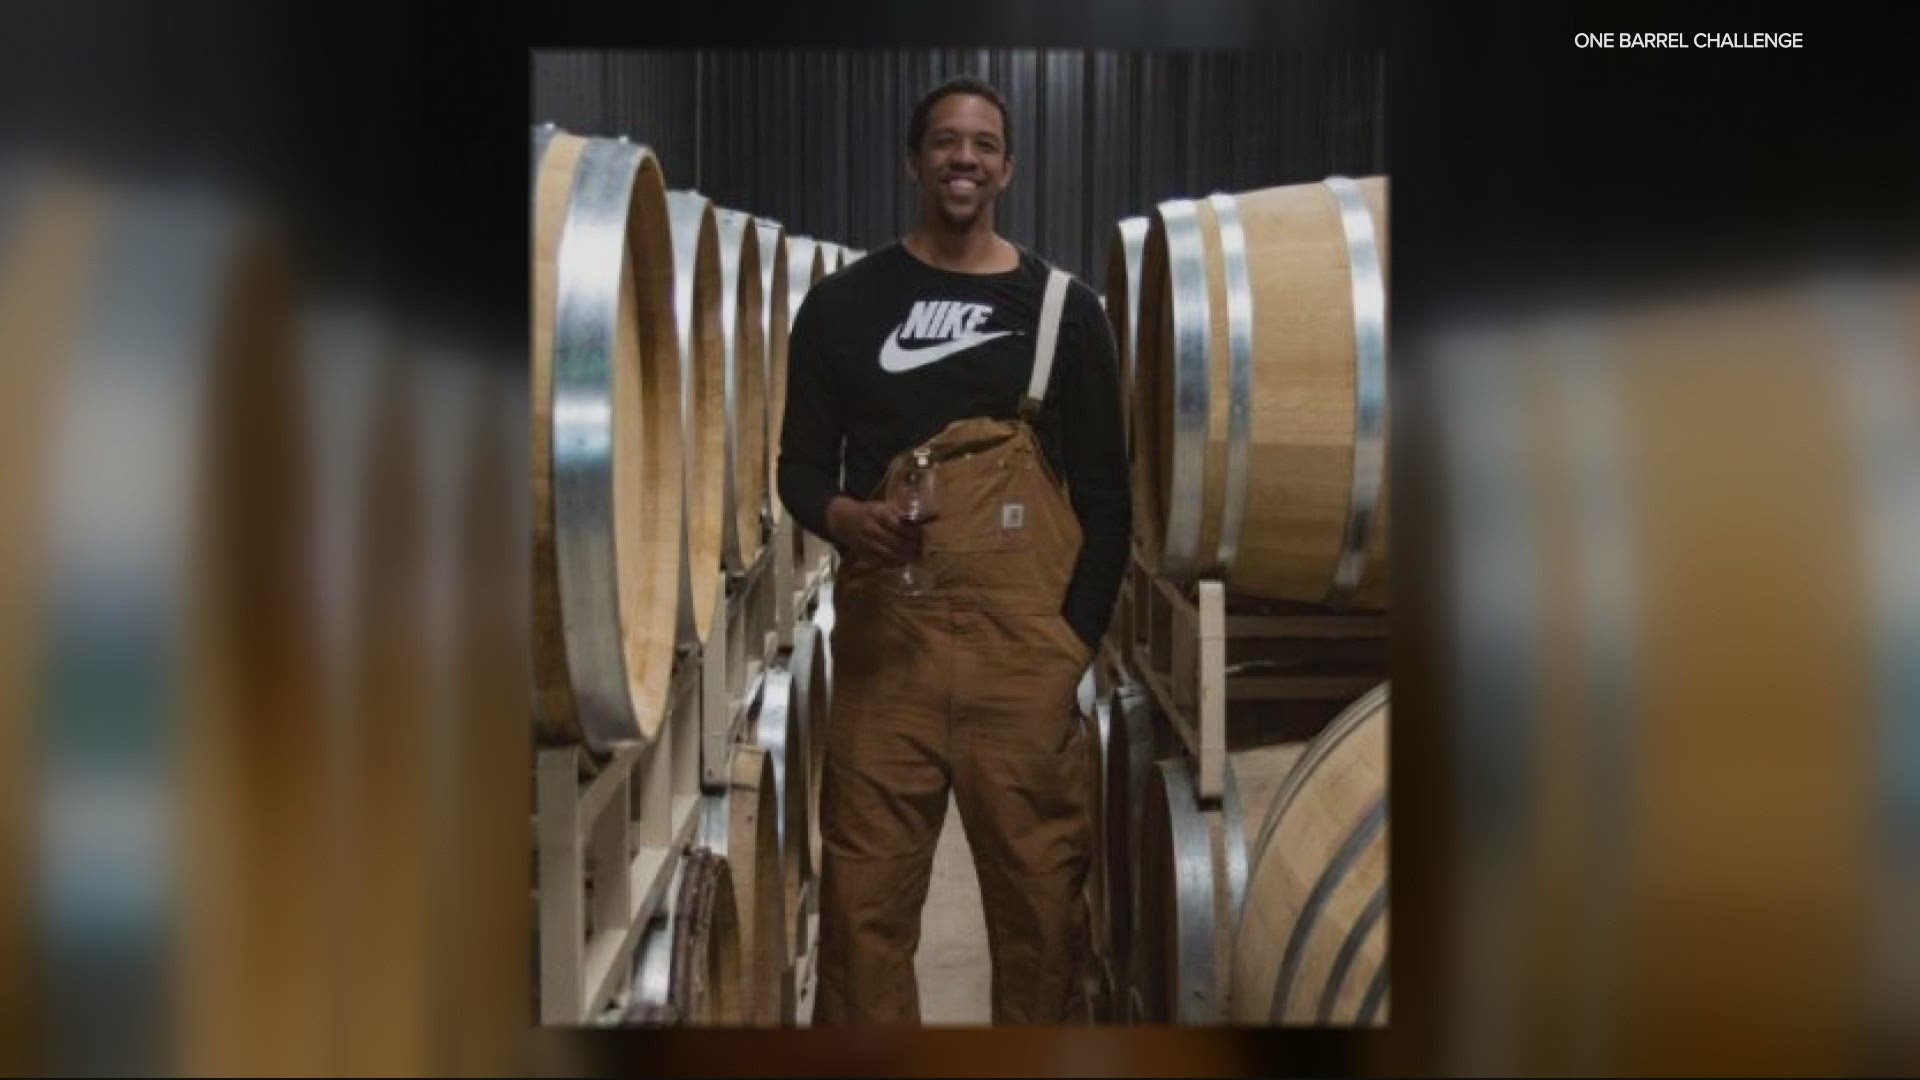 Channing Frye is challenging stereotypes in the wine industry.